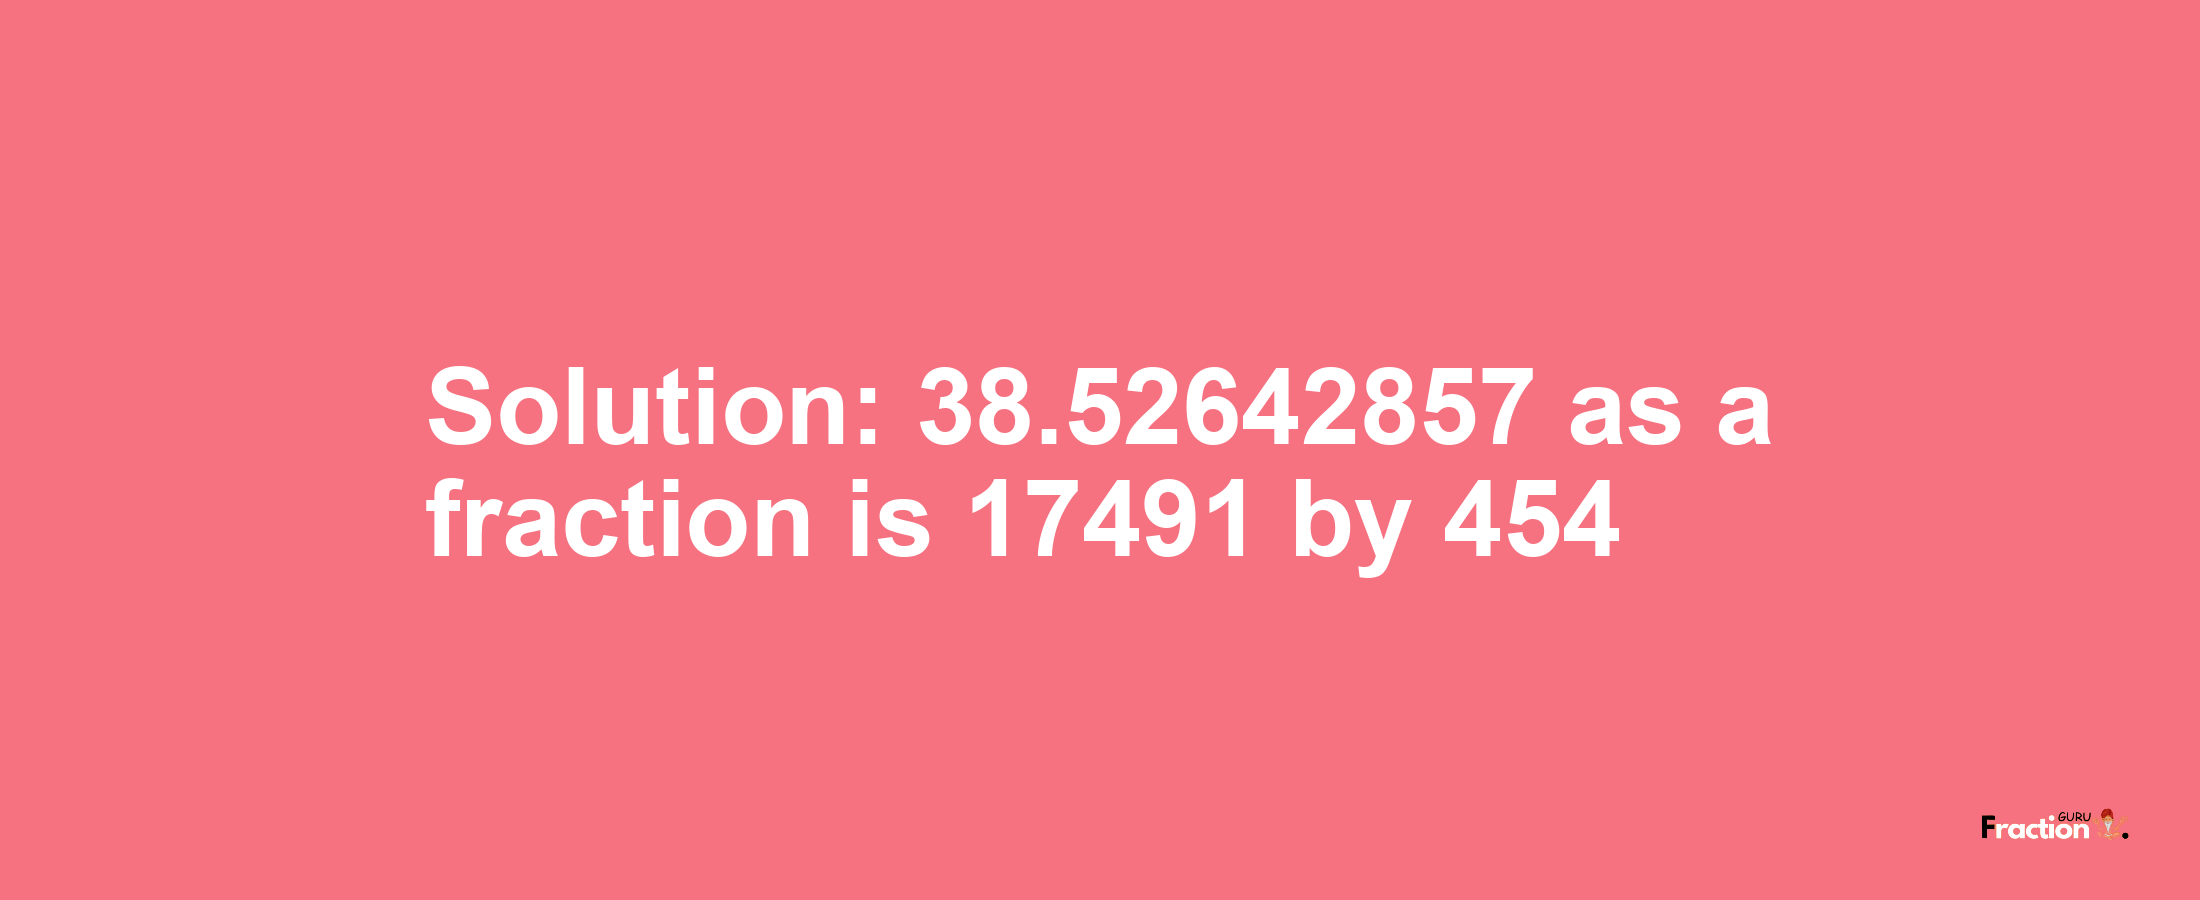 Solution:38.52642857 as a fraction is 17491/454